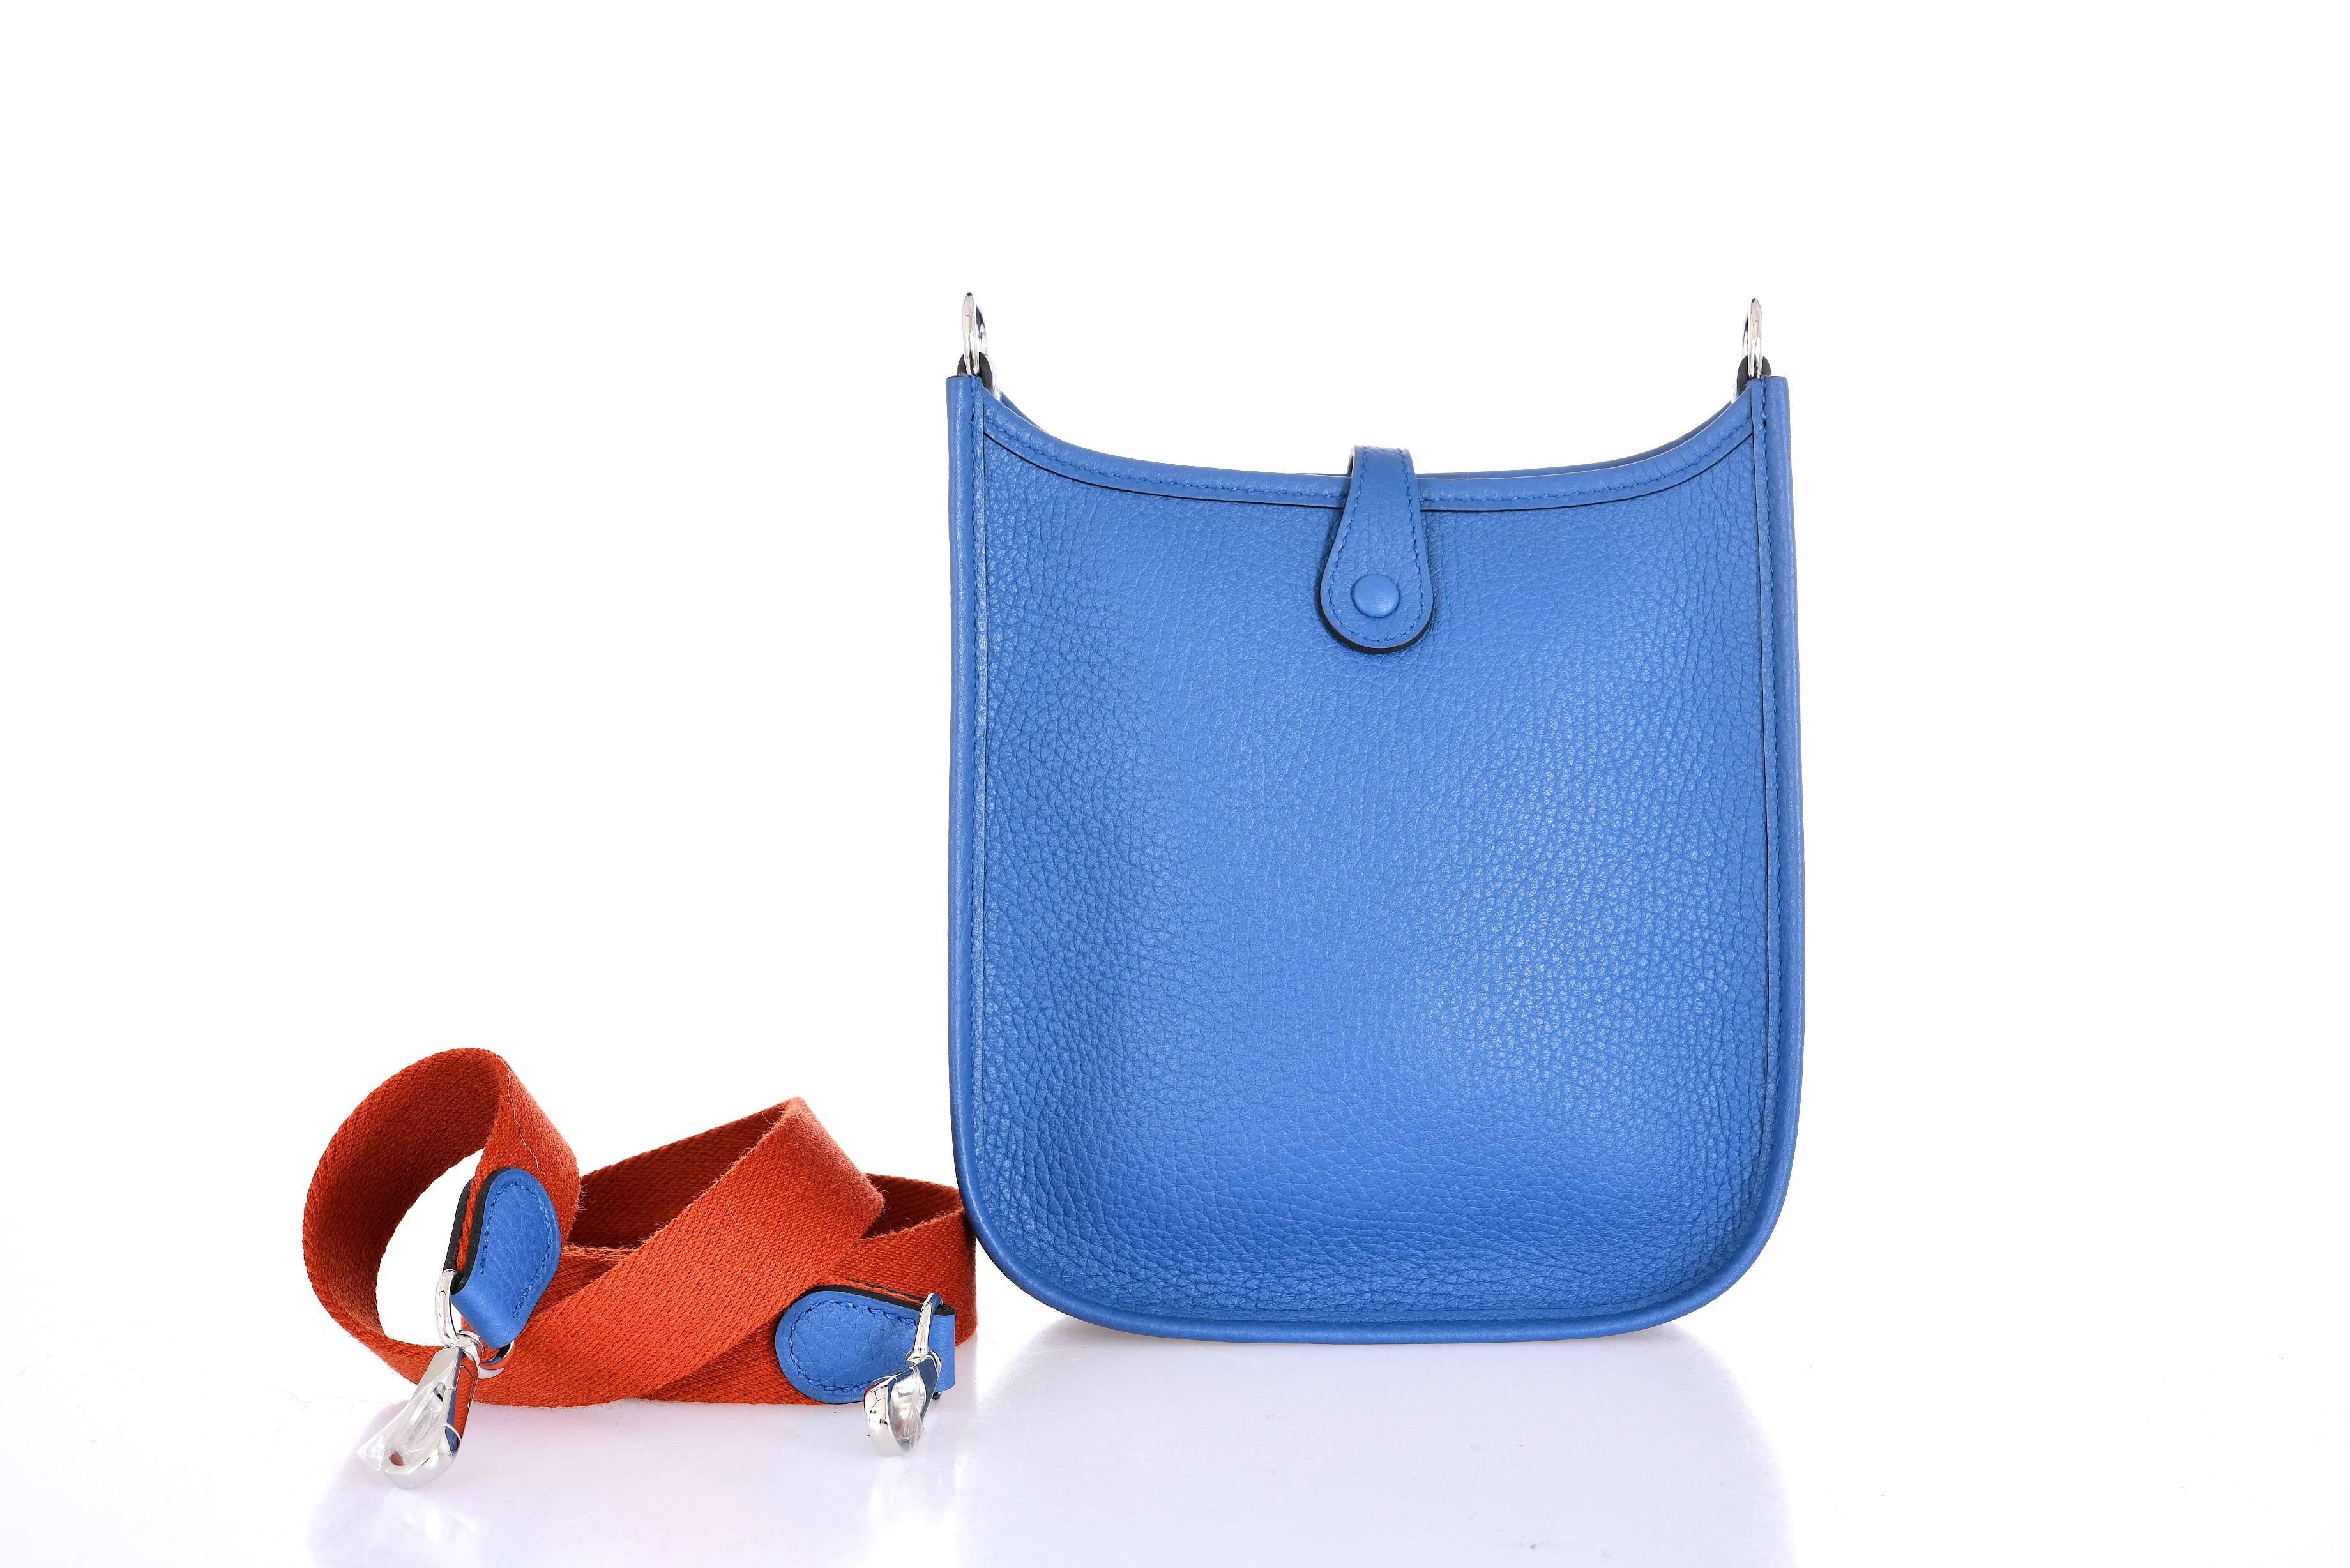 New Condition

Hermes Evelyne TPM Mini

Stunning Blue agate with Amazone Strap

Perfect cross body bag fits all the essentials: phone, wallet, lipstick, & credit card. 

The leather is Clemence. Love the removable cross body strap!

7.5" X